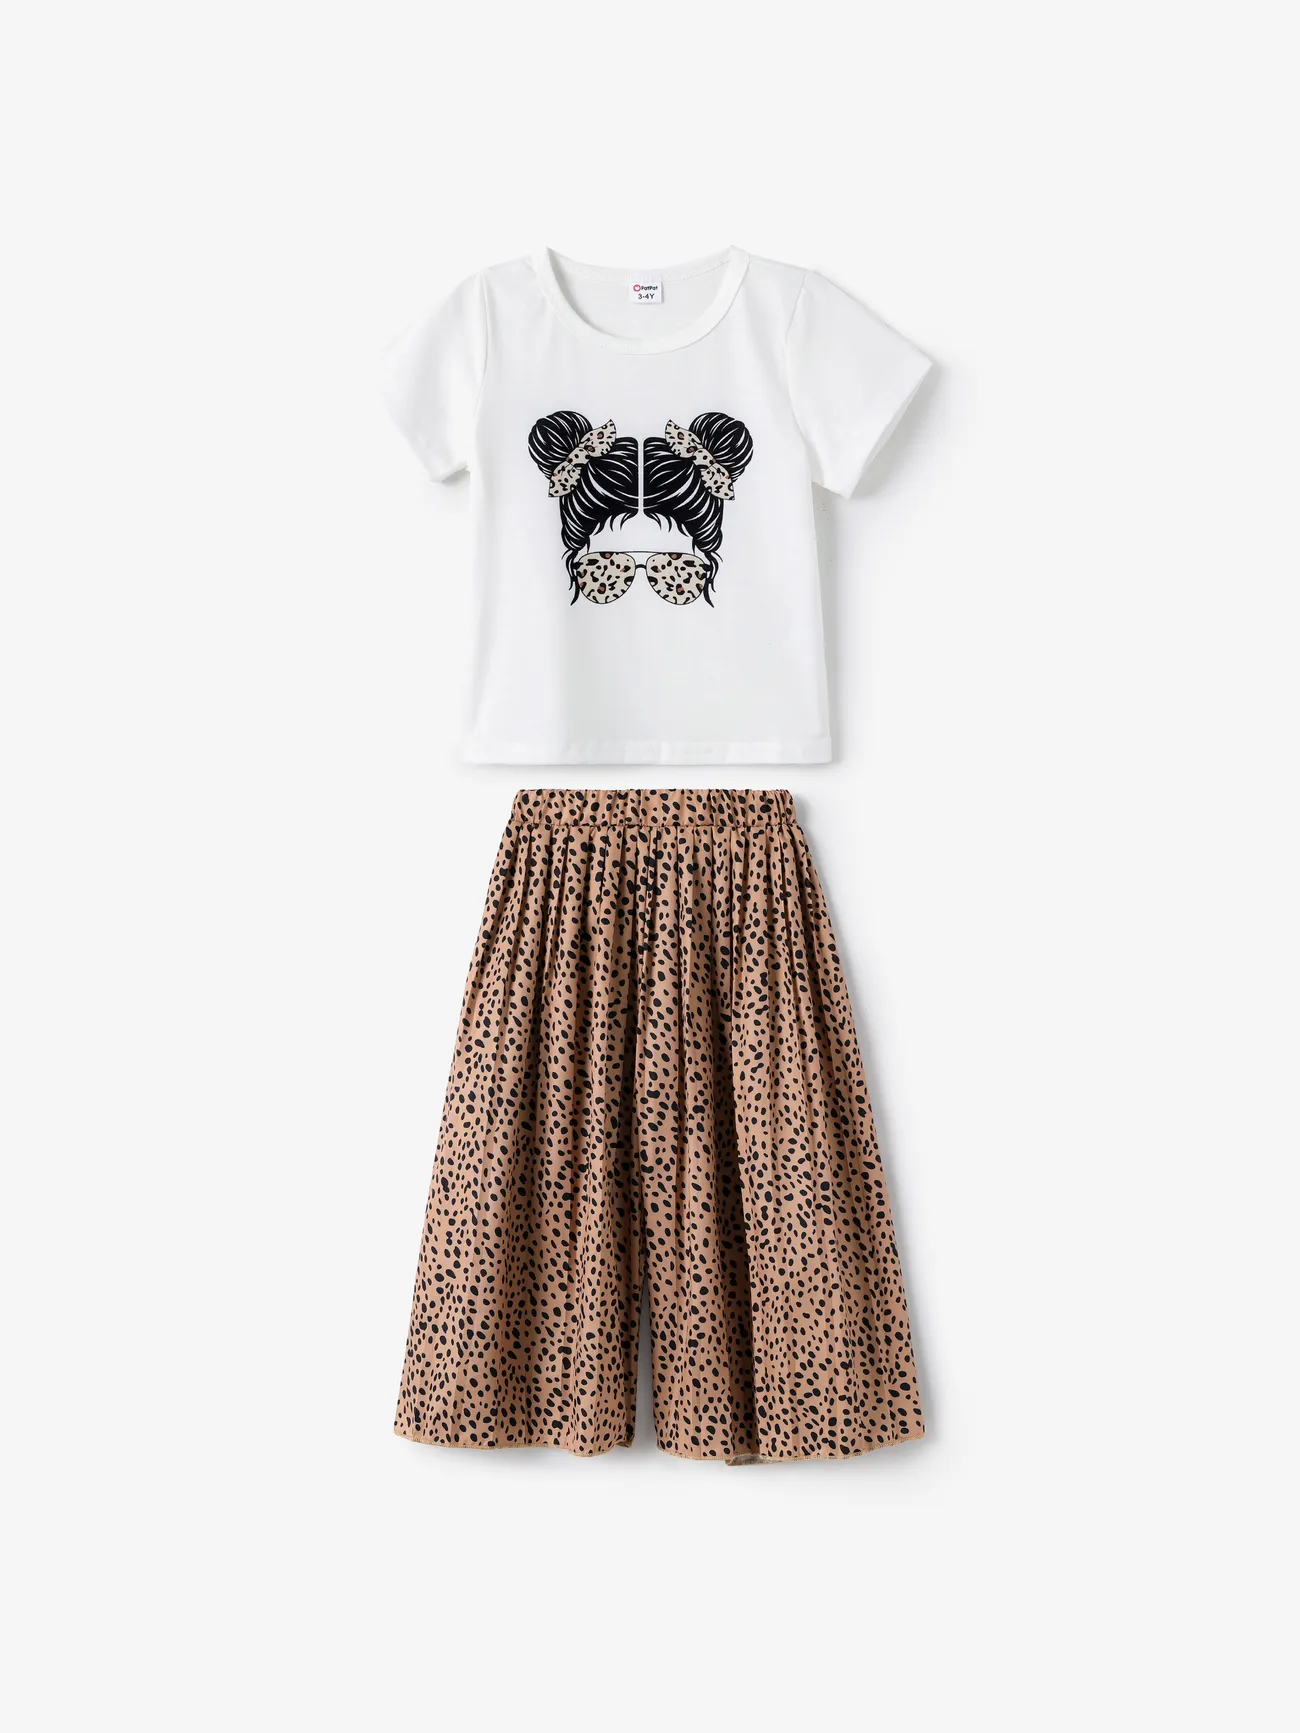 Girl's 2pcs Avant-garde Character T-Shirt and Wide Leg Pant Set with Pleat, White Print White big image 1